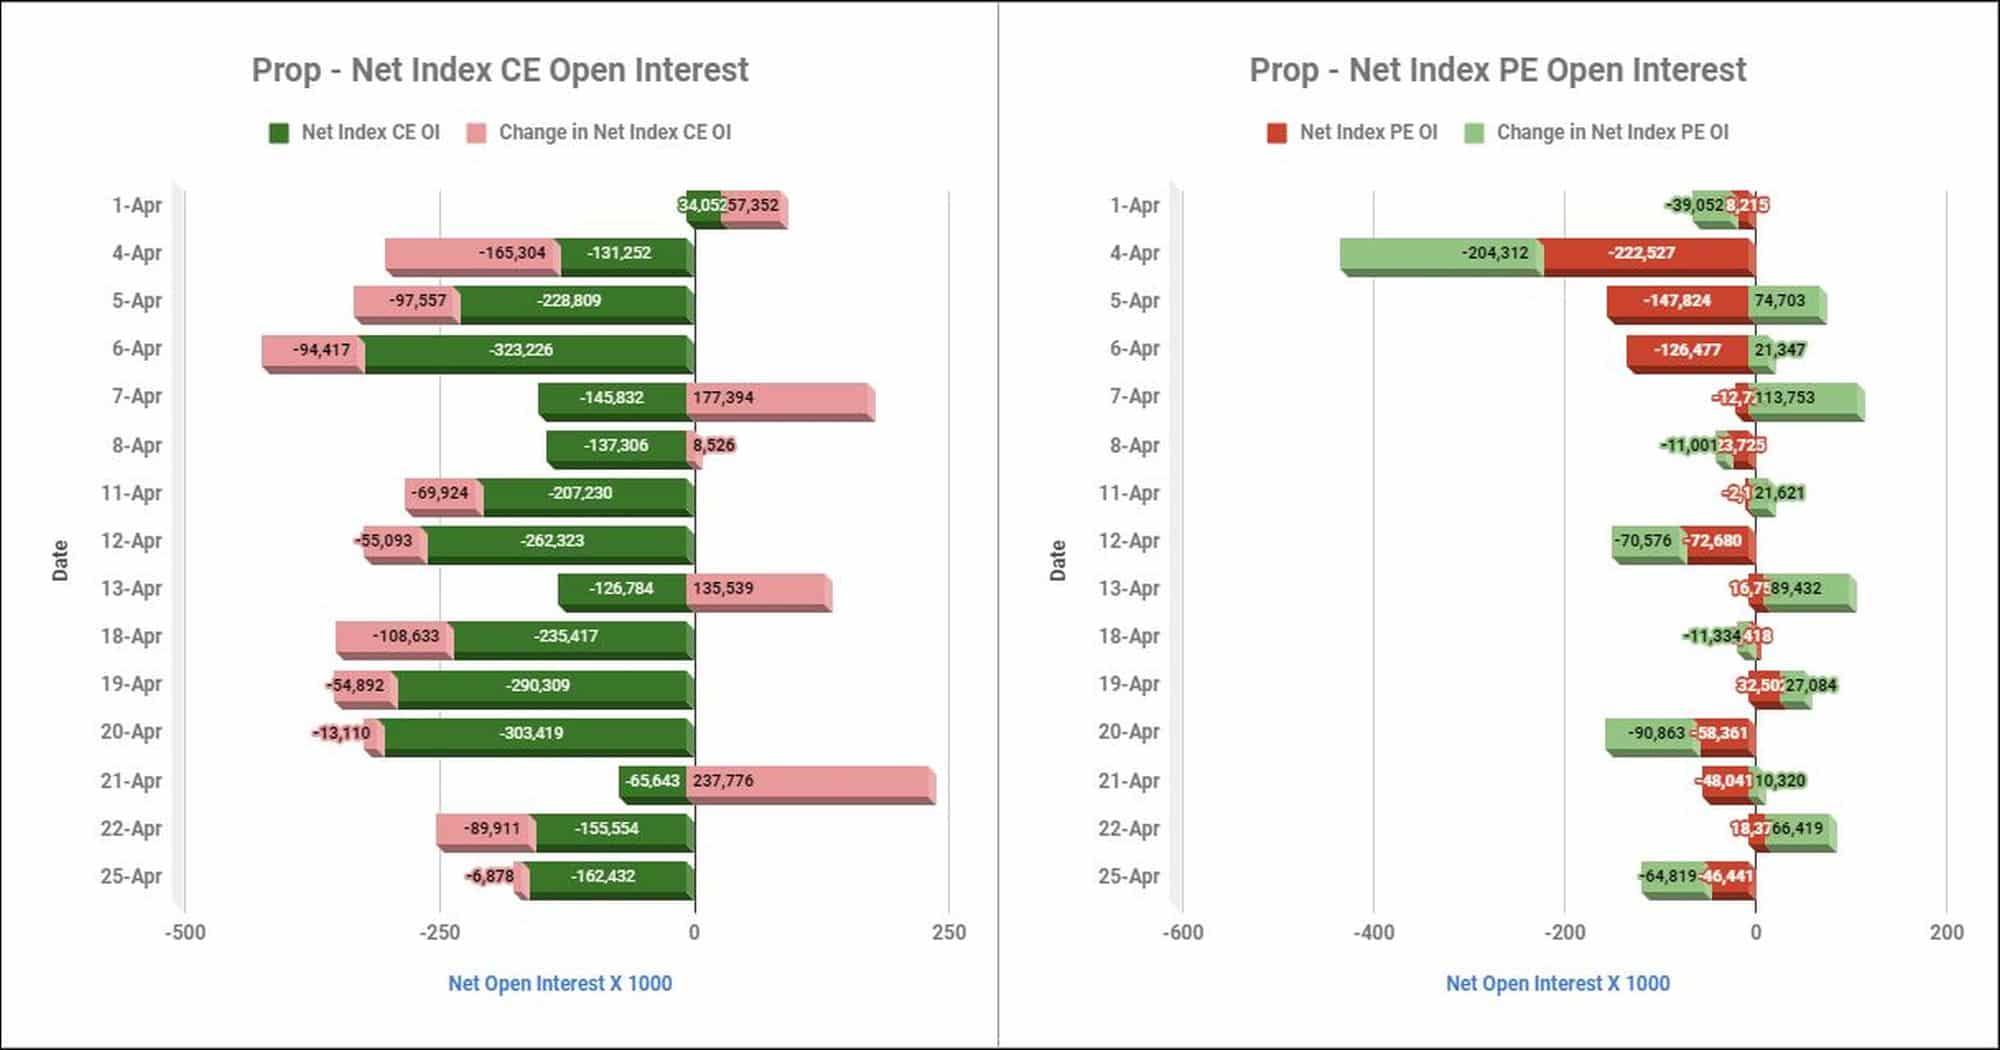 Proinop25Apr Participantwise Net Open Interest And Net Equity Investments – 25Th Apr 2022 Client, Equity, Fii, Index Futures, Index Options, Open Interest, Prop